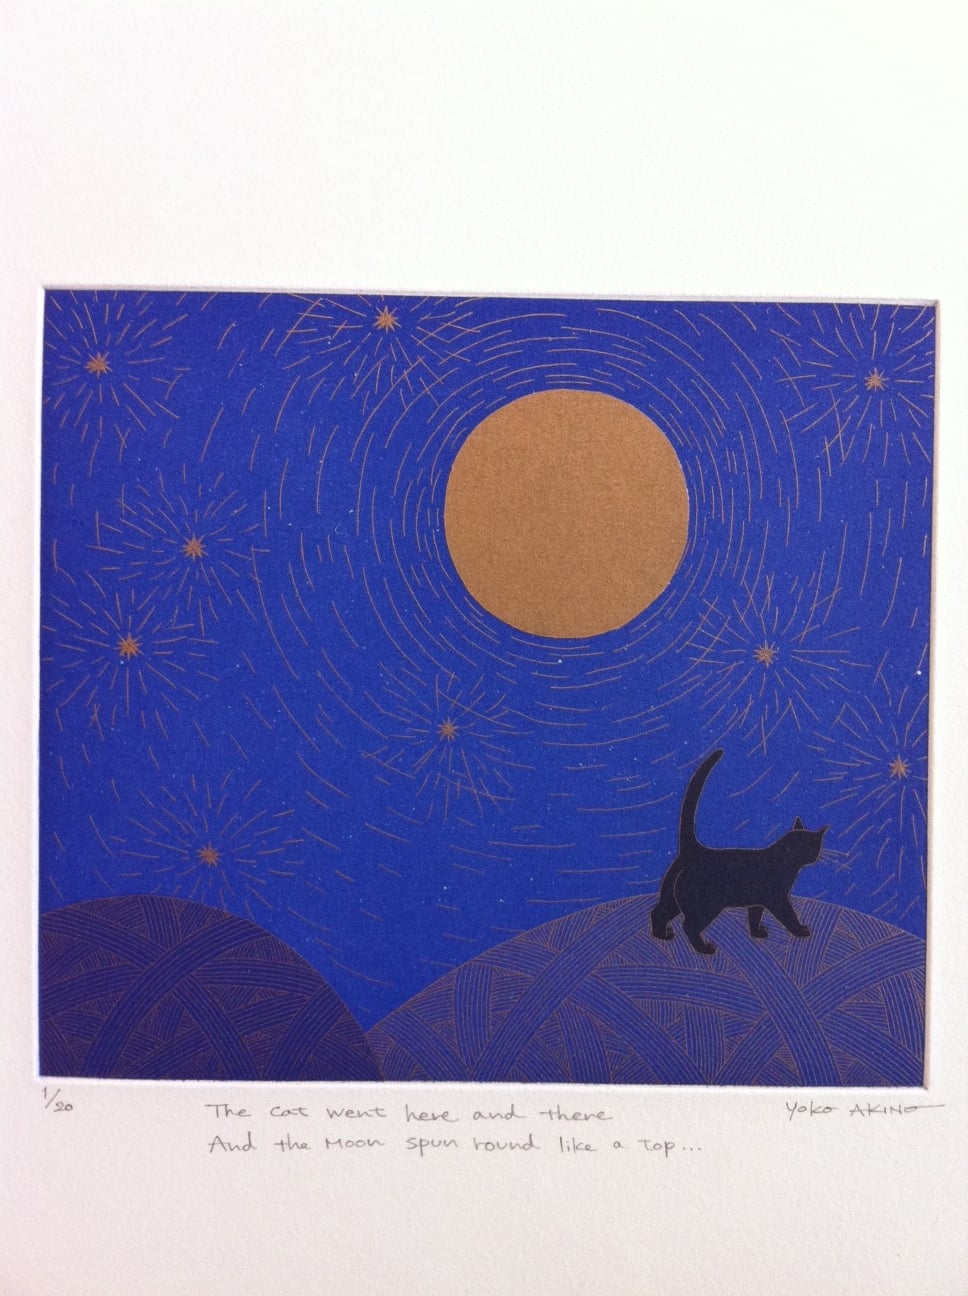 The Cat went Here and there and the moon spun round like a top…